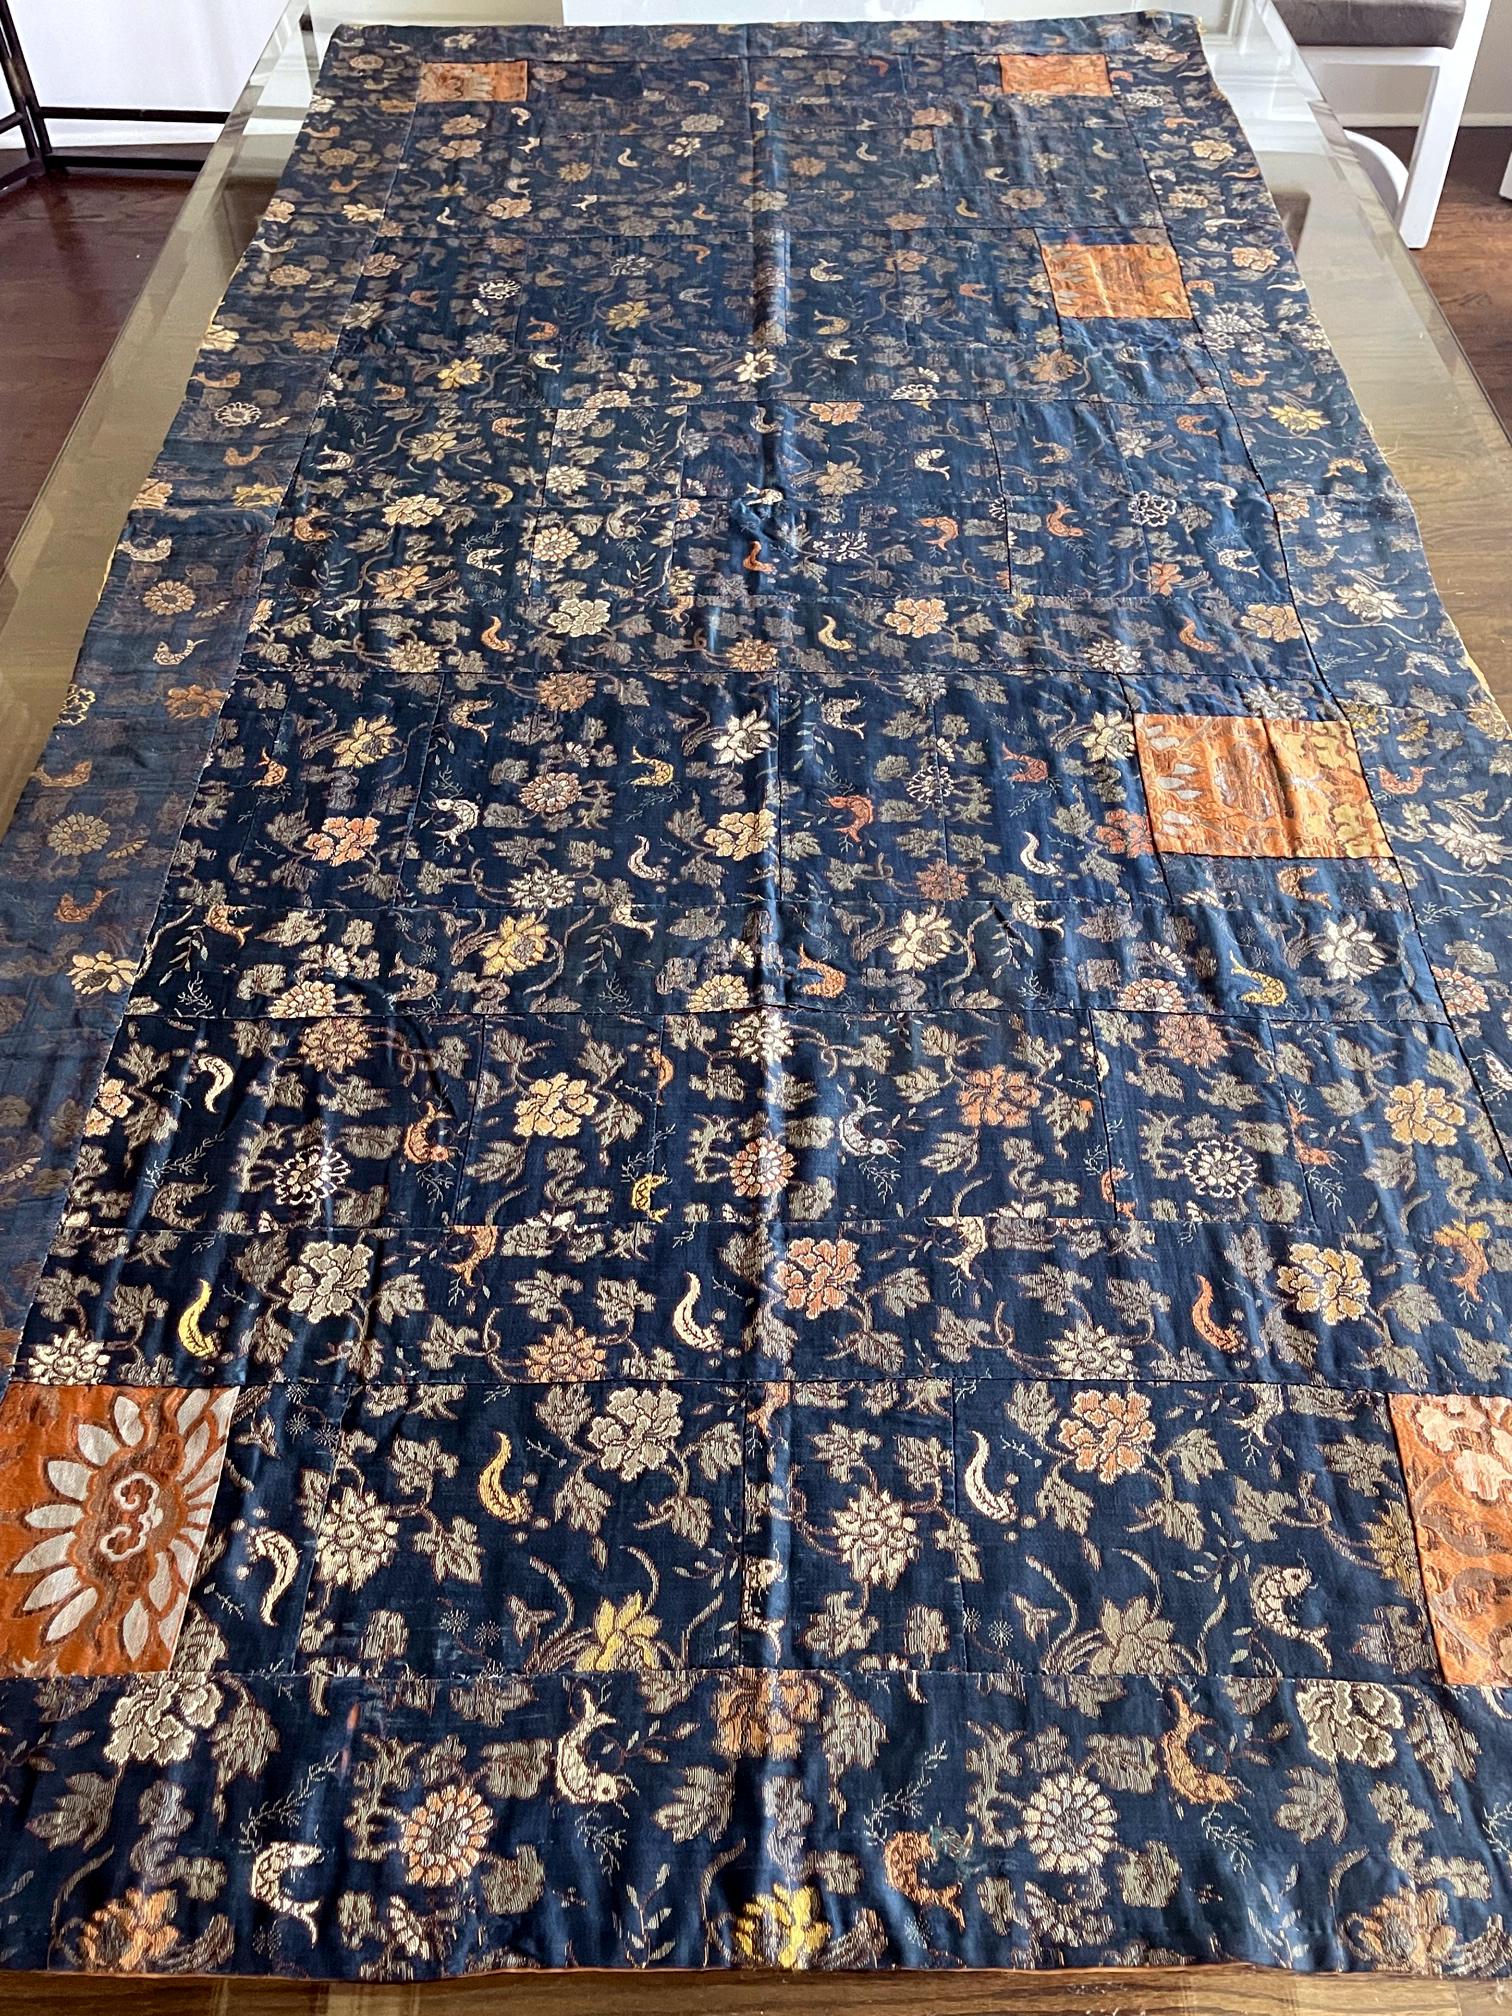 A Japanese Kesa (Monk's Vestment) made from thirteen columns of patchworks of blue brocades with sumptuous woven pattern in colored and gold threads. The elaborate motifs feature repetitive pattern of blooming peonies and schools of carp among